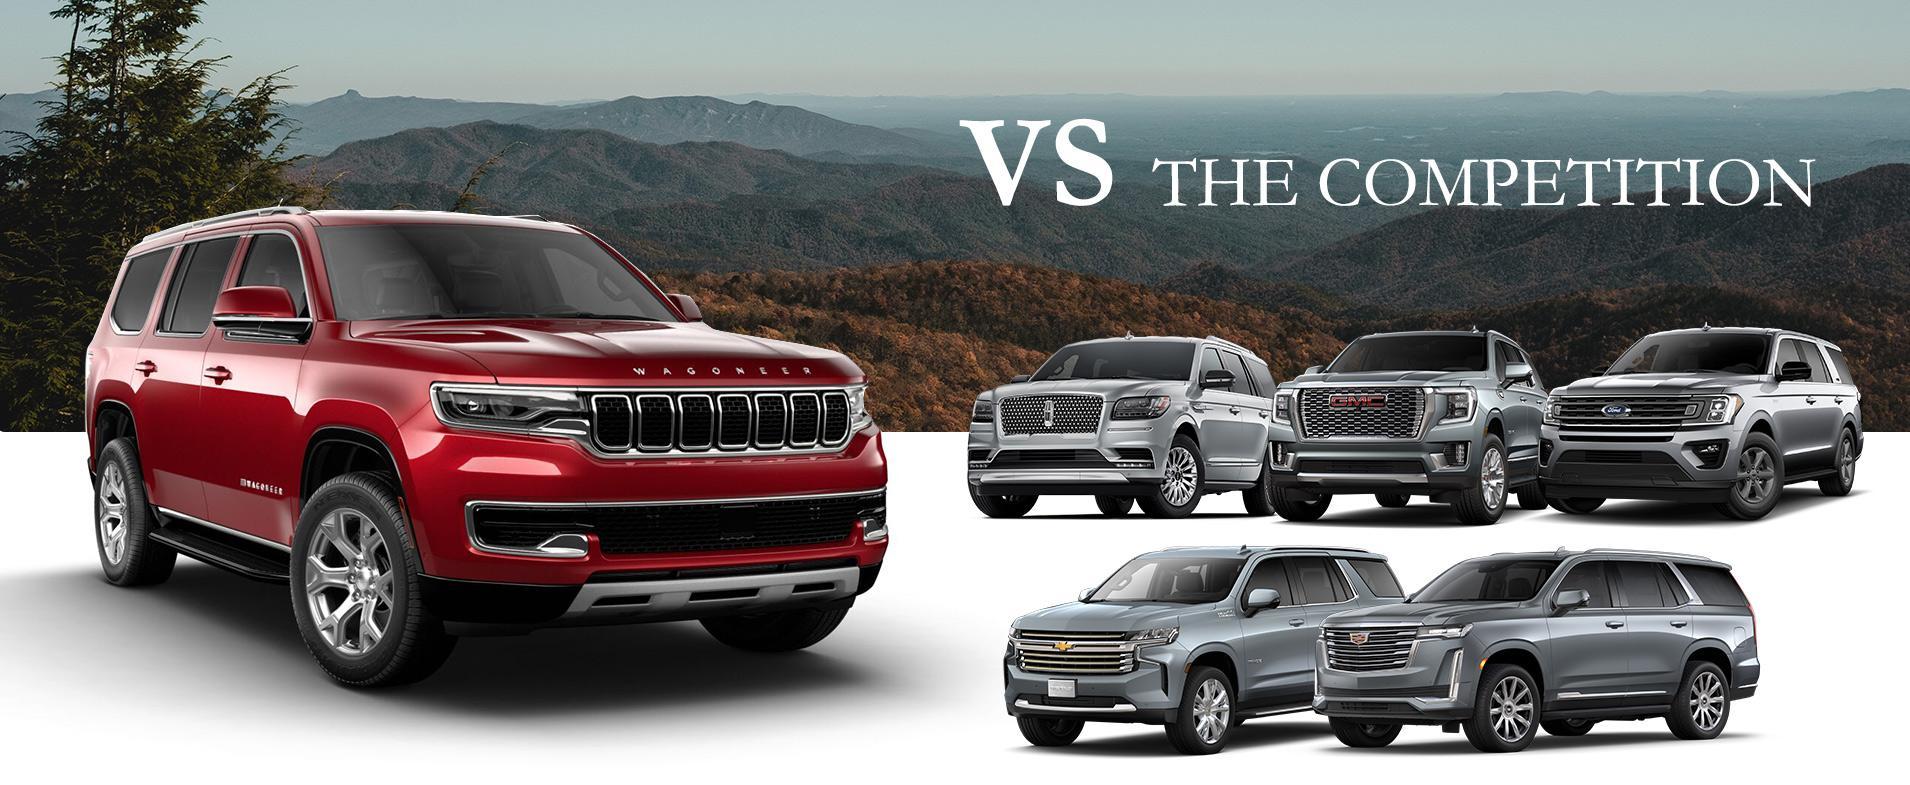 Wagoneer vs the competition